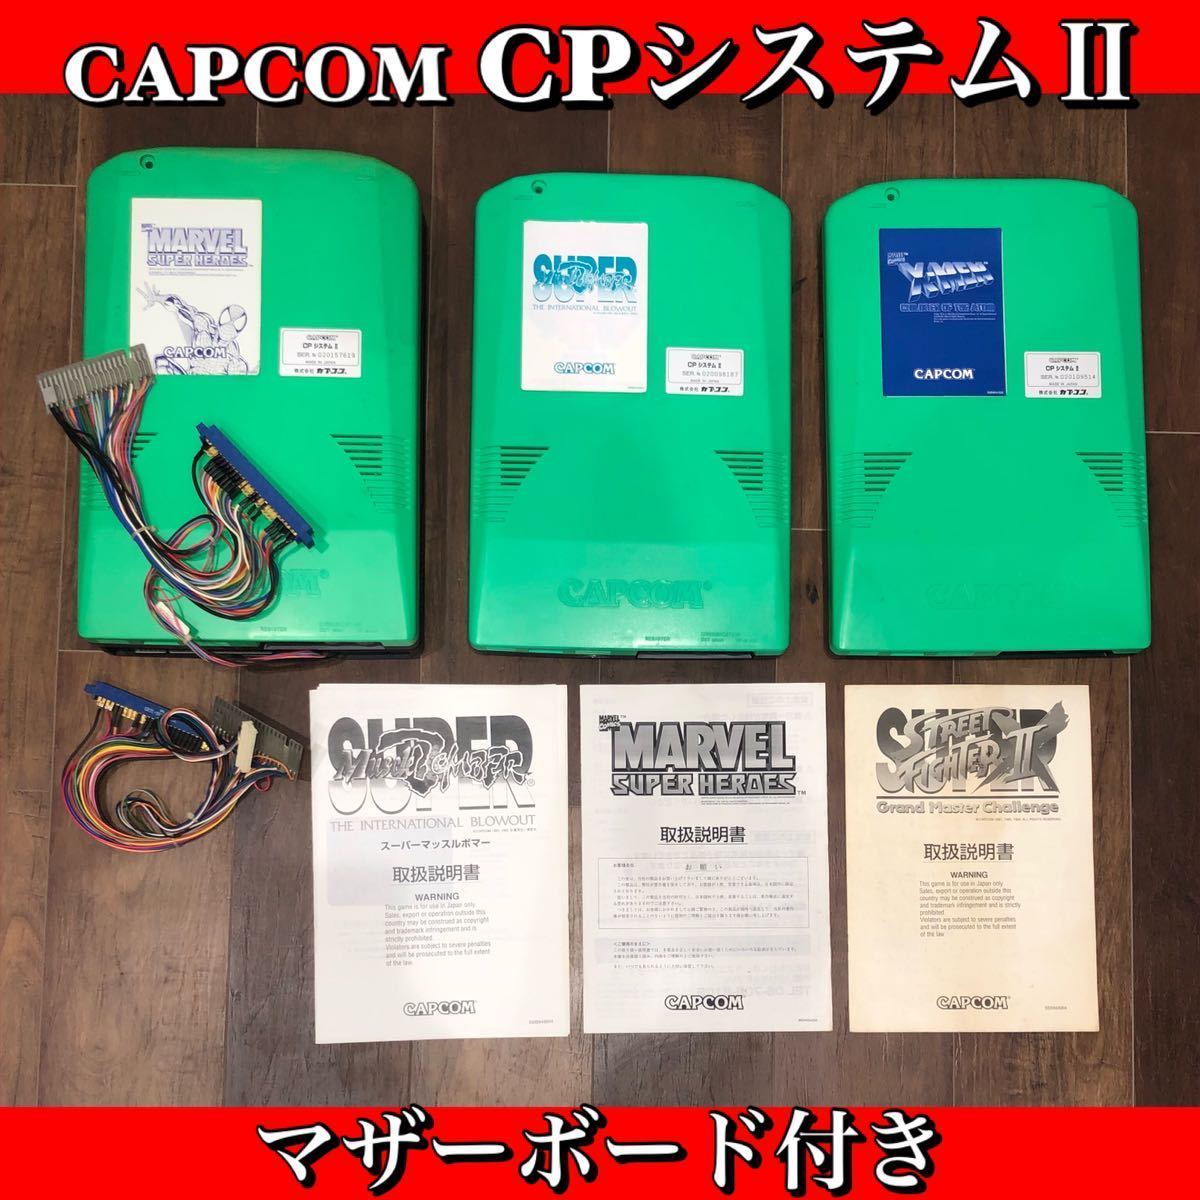 * Capcom * CP system 2(CPS2) motherboard super muscle boma-X-MENma- bell super hero zMARVEL game baseplate CAPCOM